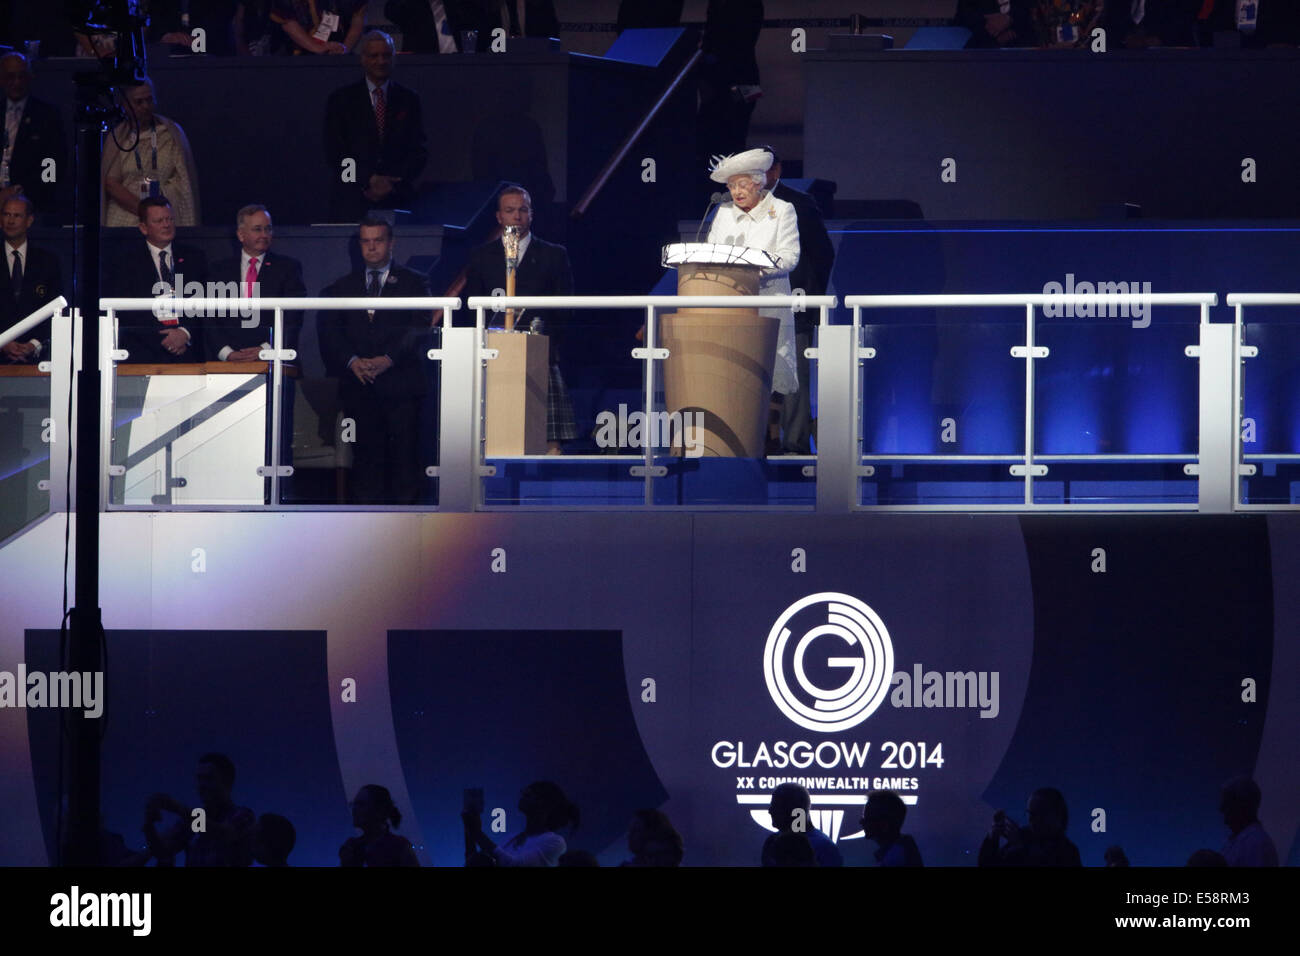 Celtic Park, Glasgow, Scotland, UK, Wednesday, 23rd July, 2014. Her Majesty Queen Elizabeth II reading a speech at the Glasgow 2014 Commonwealth Games Opening Ceremony Stock Photo